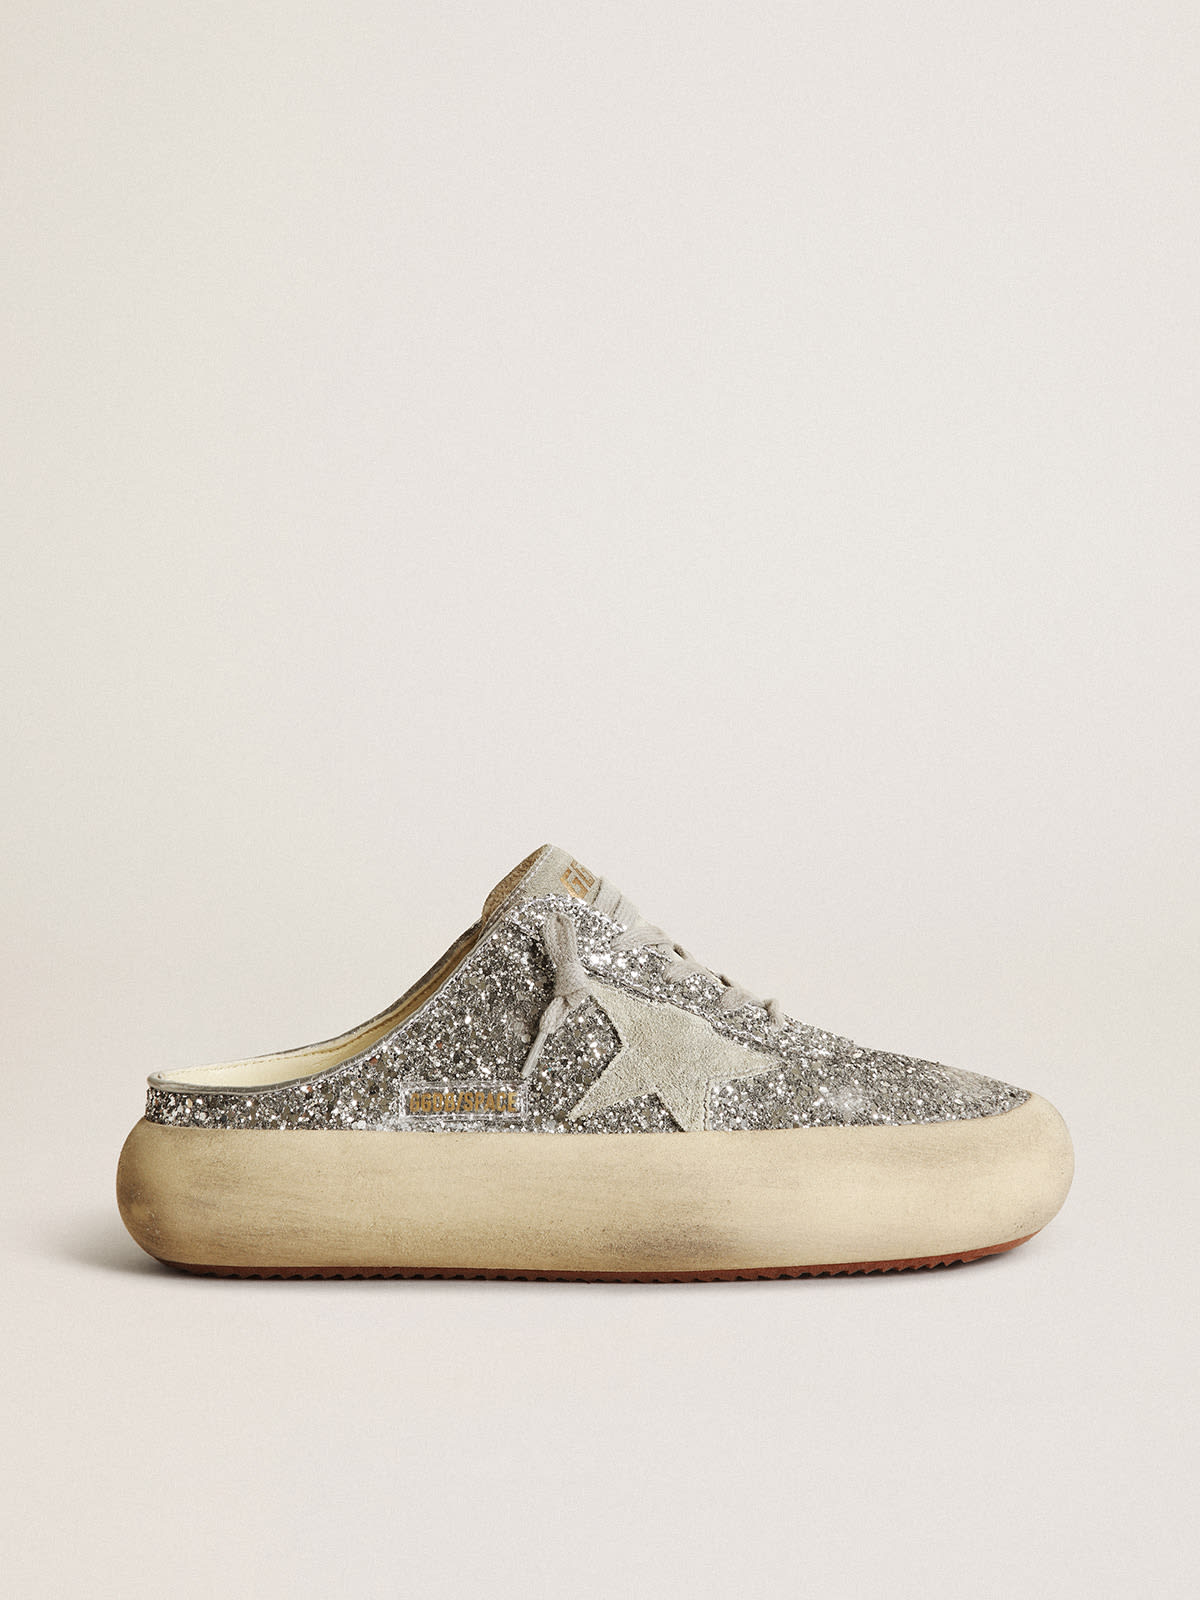 Golden Goose - Space-Star Sabots in silver glitter with ice-gray suede star and tongue in 